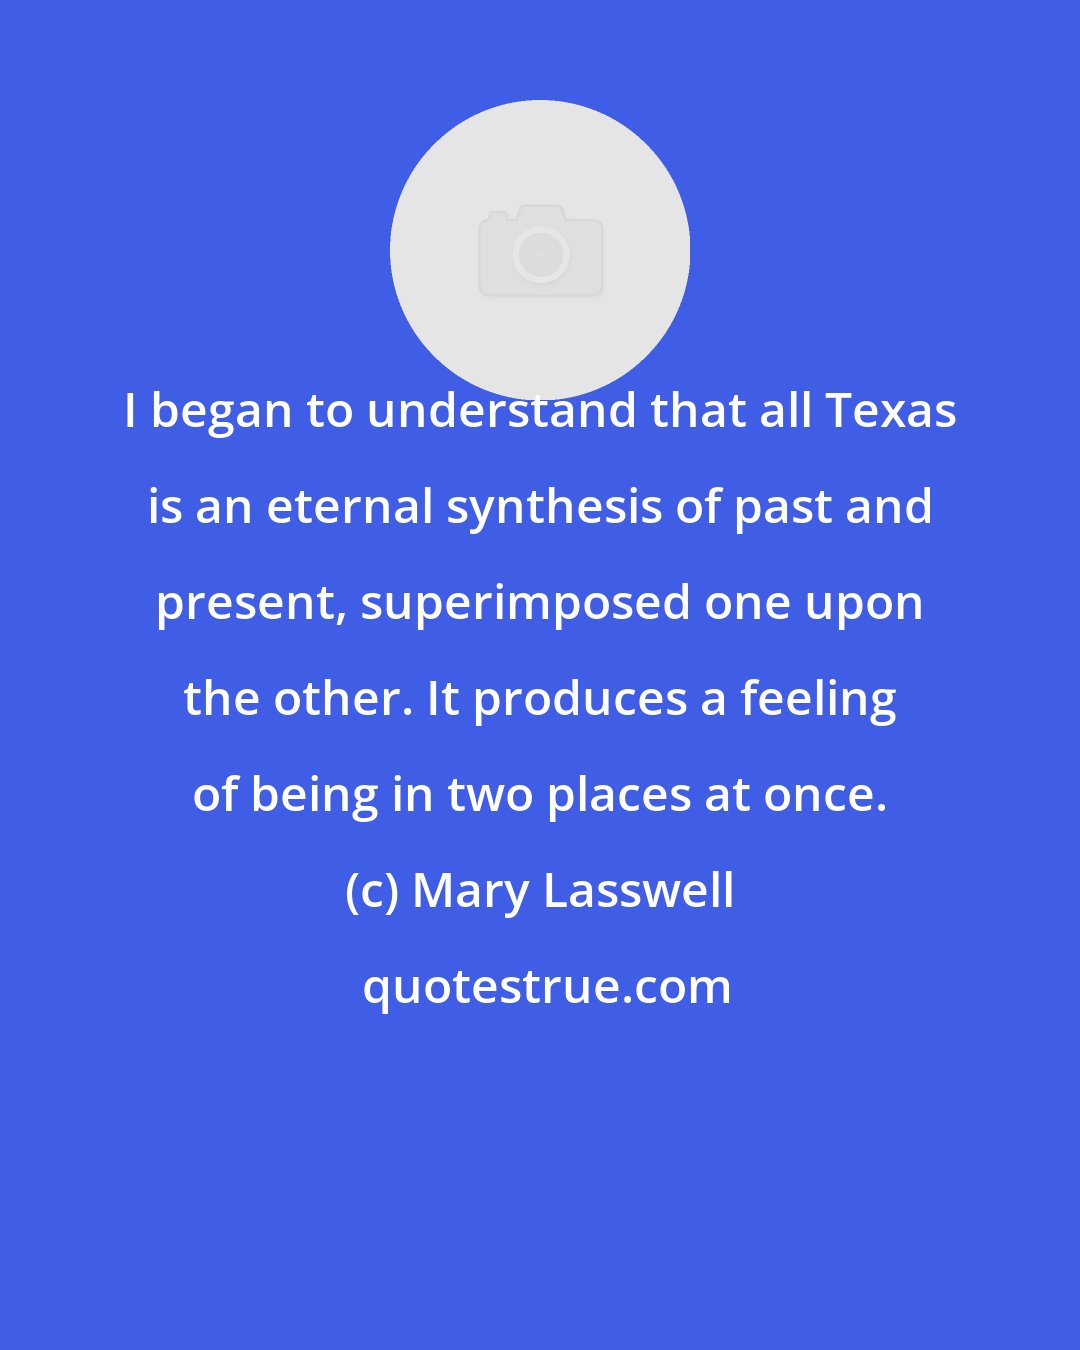 Mary Lasswell: I began to understand that all Texas is an eternal synthesis of past and present, superimposed one upon the other. It produces a feeling of being in two places at once.